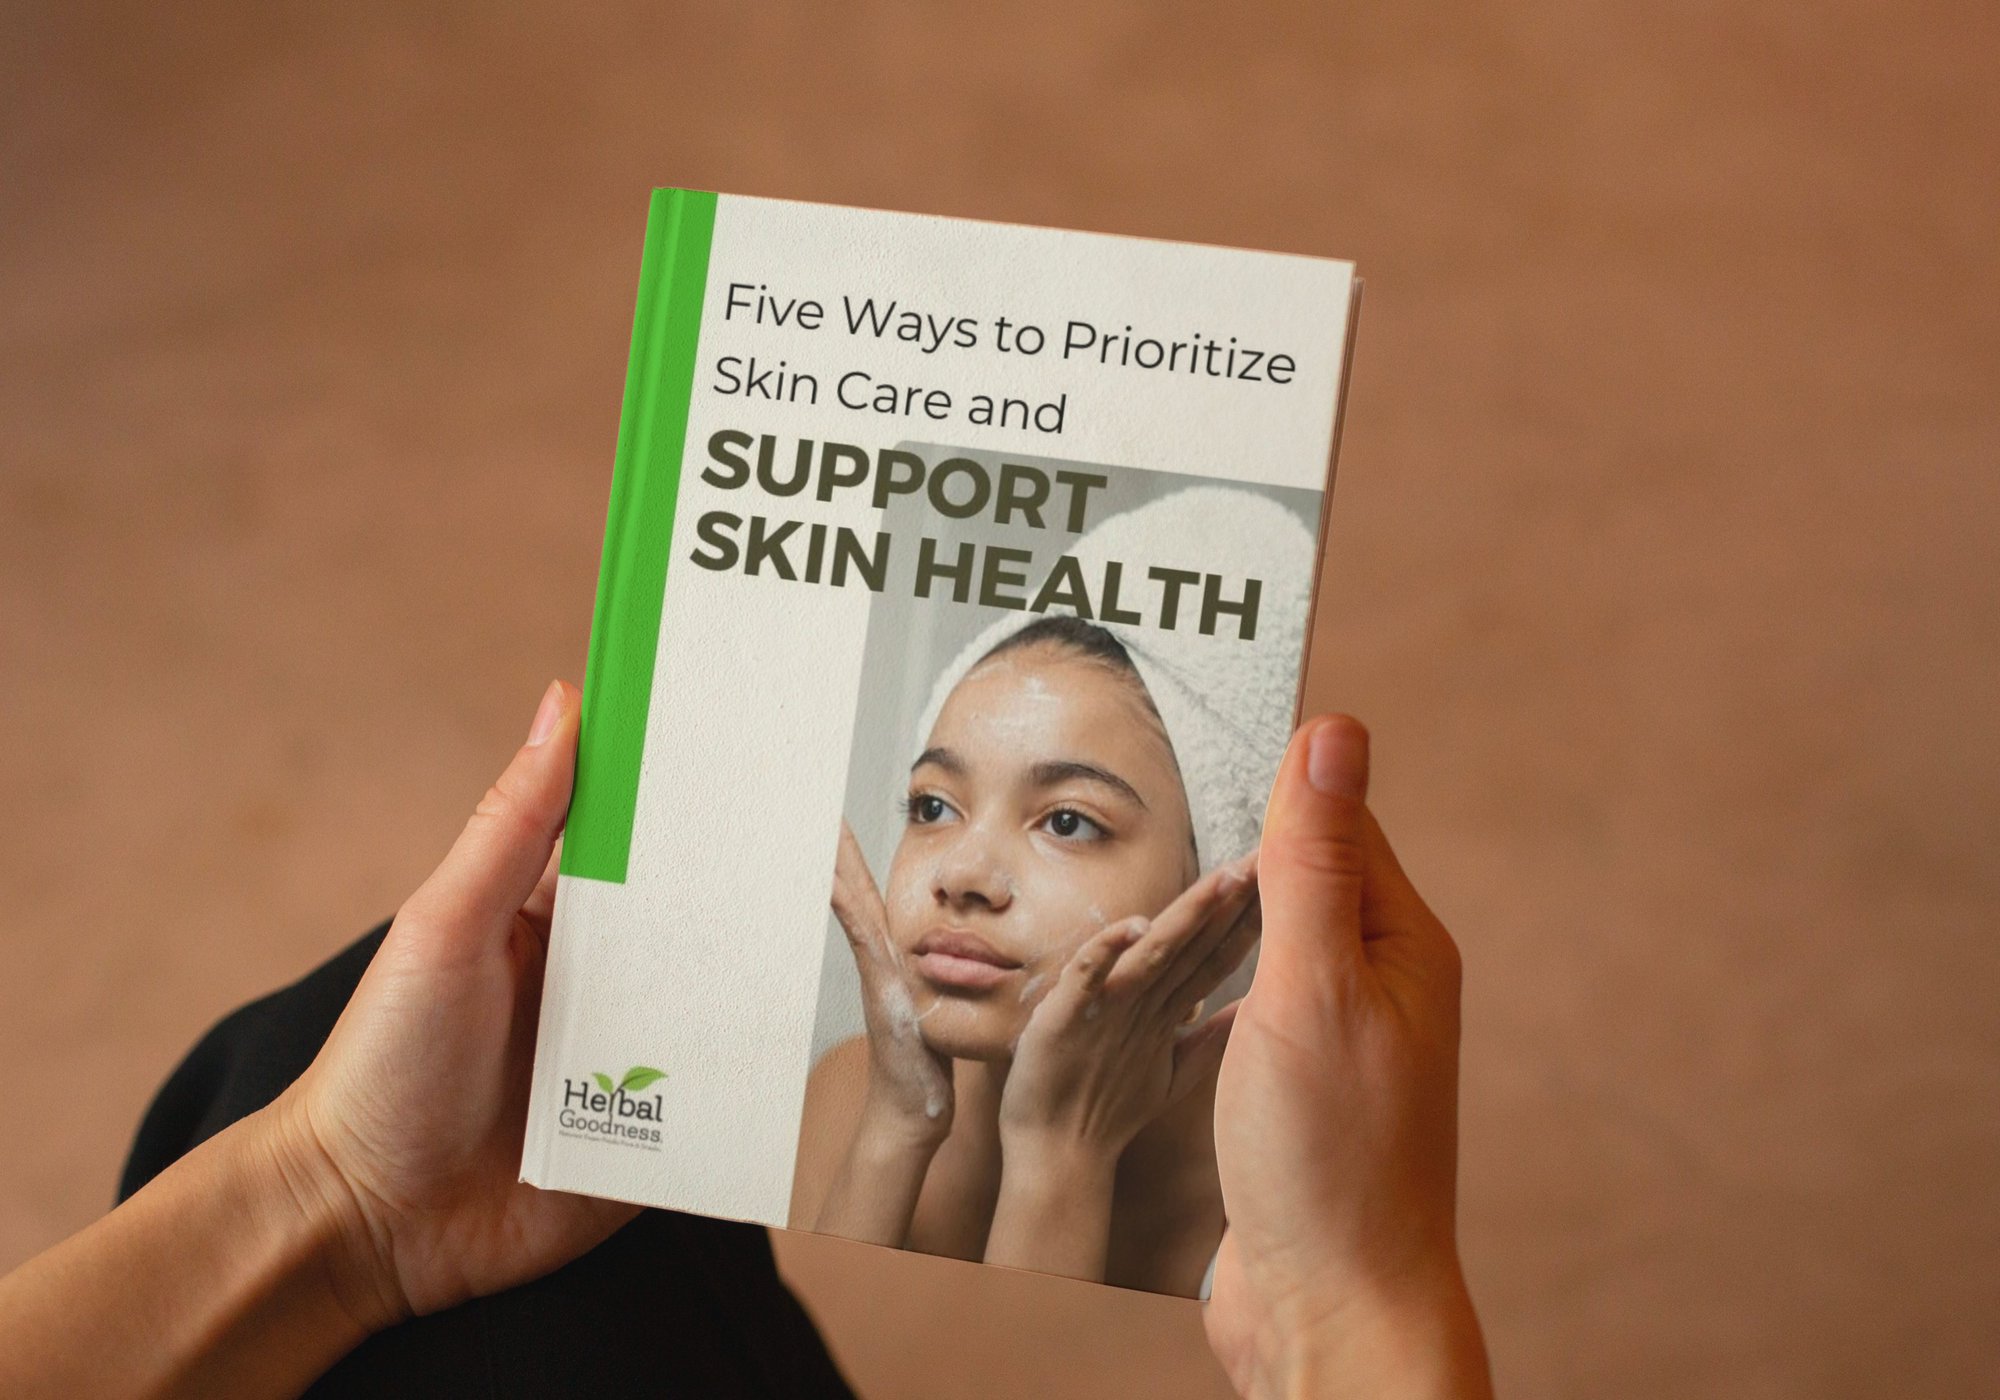 Five Ways to Prioritize Skin Care and Support Skin